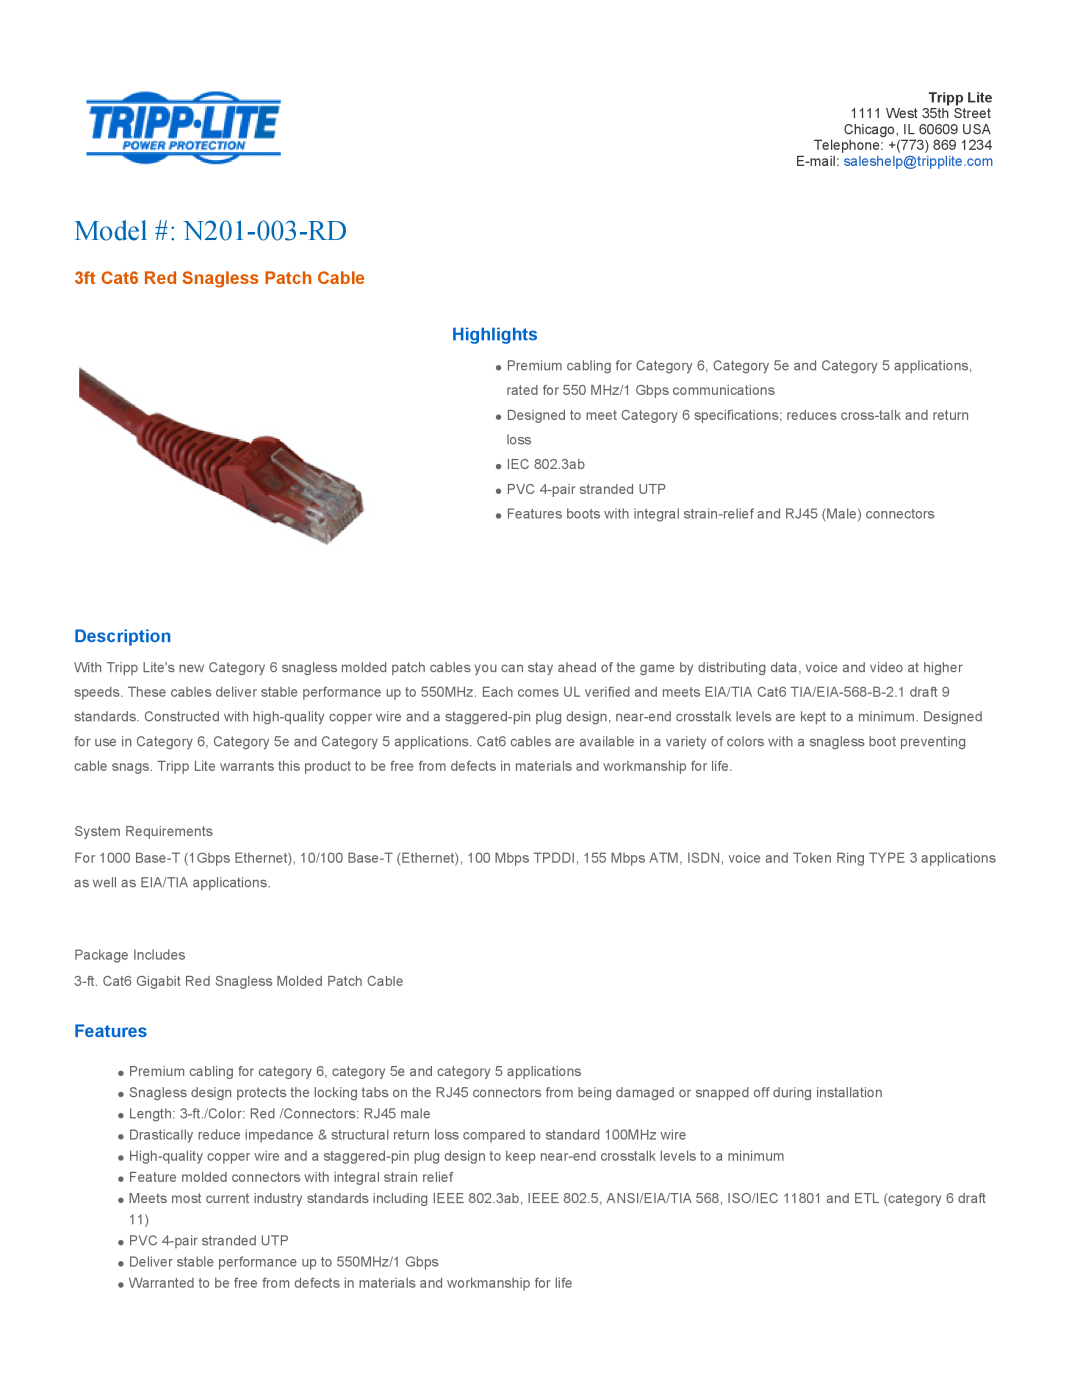 Tripp Lite specifications Highlights, Description, Features, Model # N201-003-RD, 3ft Cat6 Red Snagless Patch Cable 